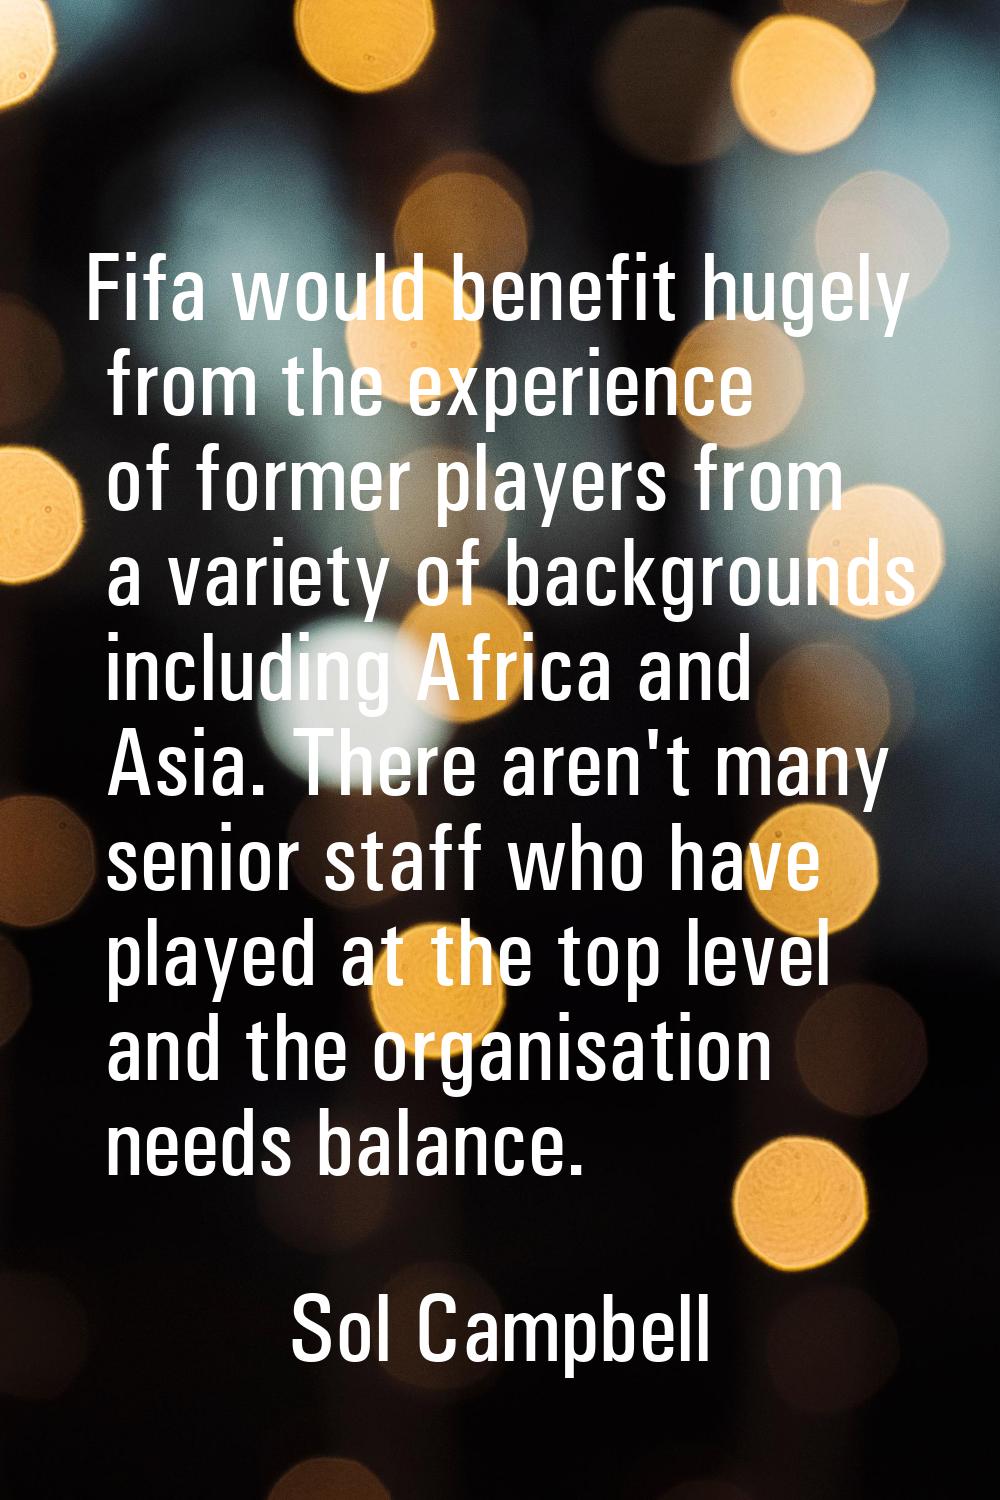 Fifa would benefit hugely from the experience of former players from a variety of backgrounds inclu